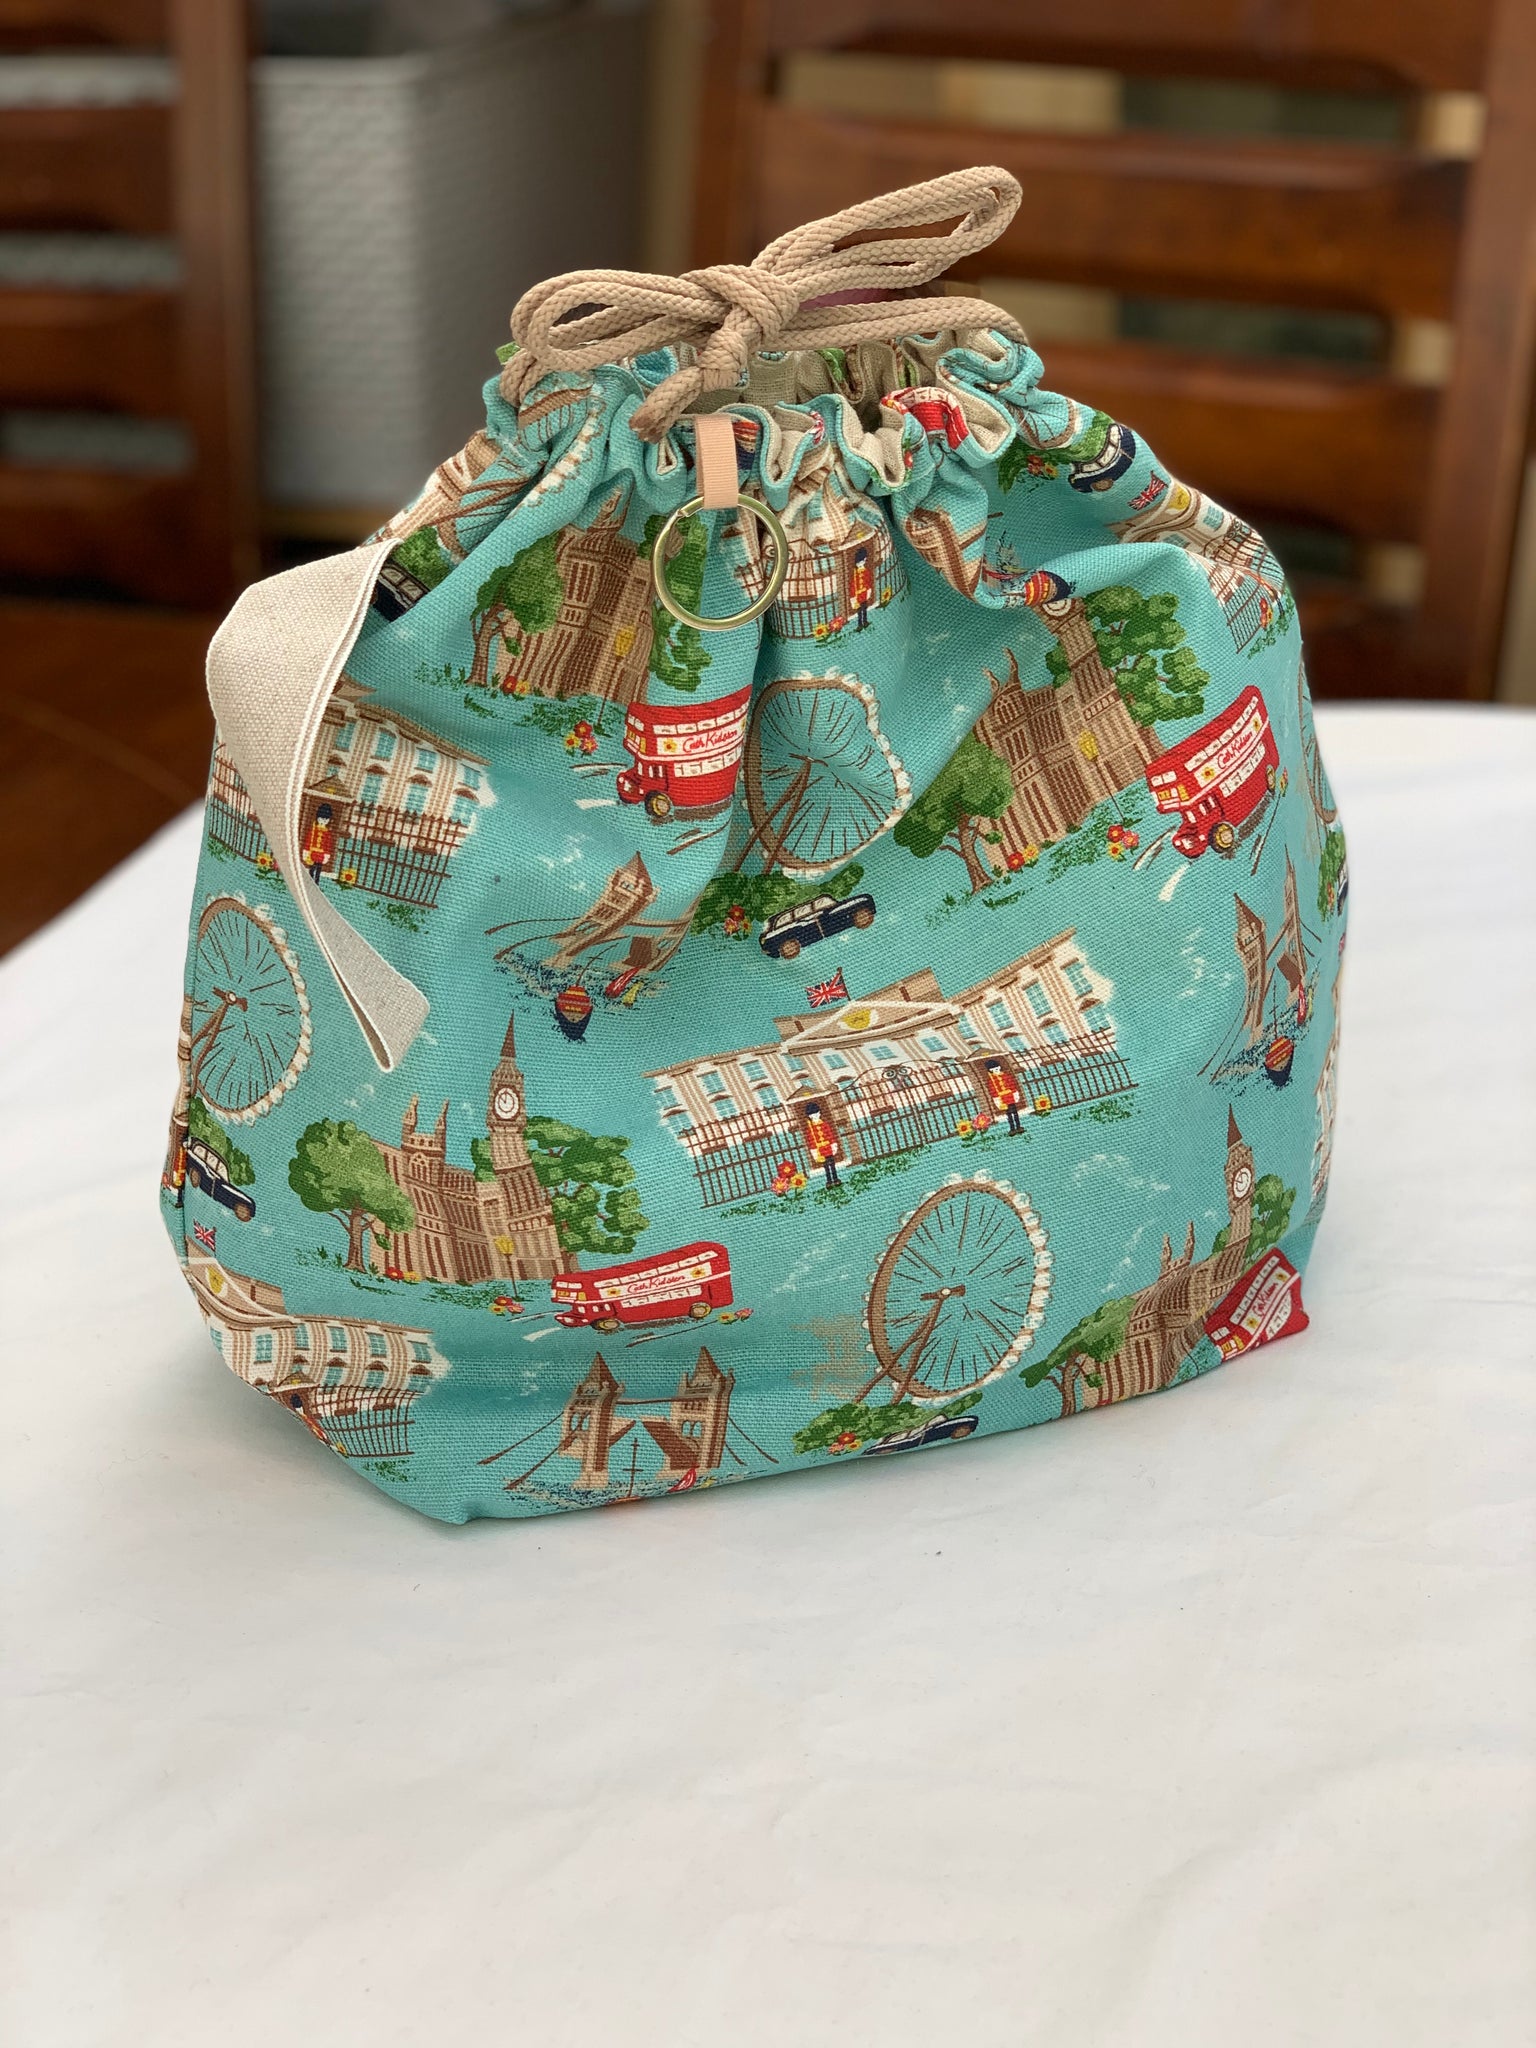 Cath Kidston Snoopy Bags - CollectPeanuts.com